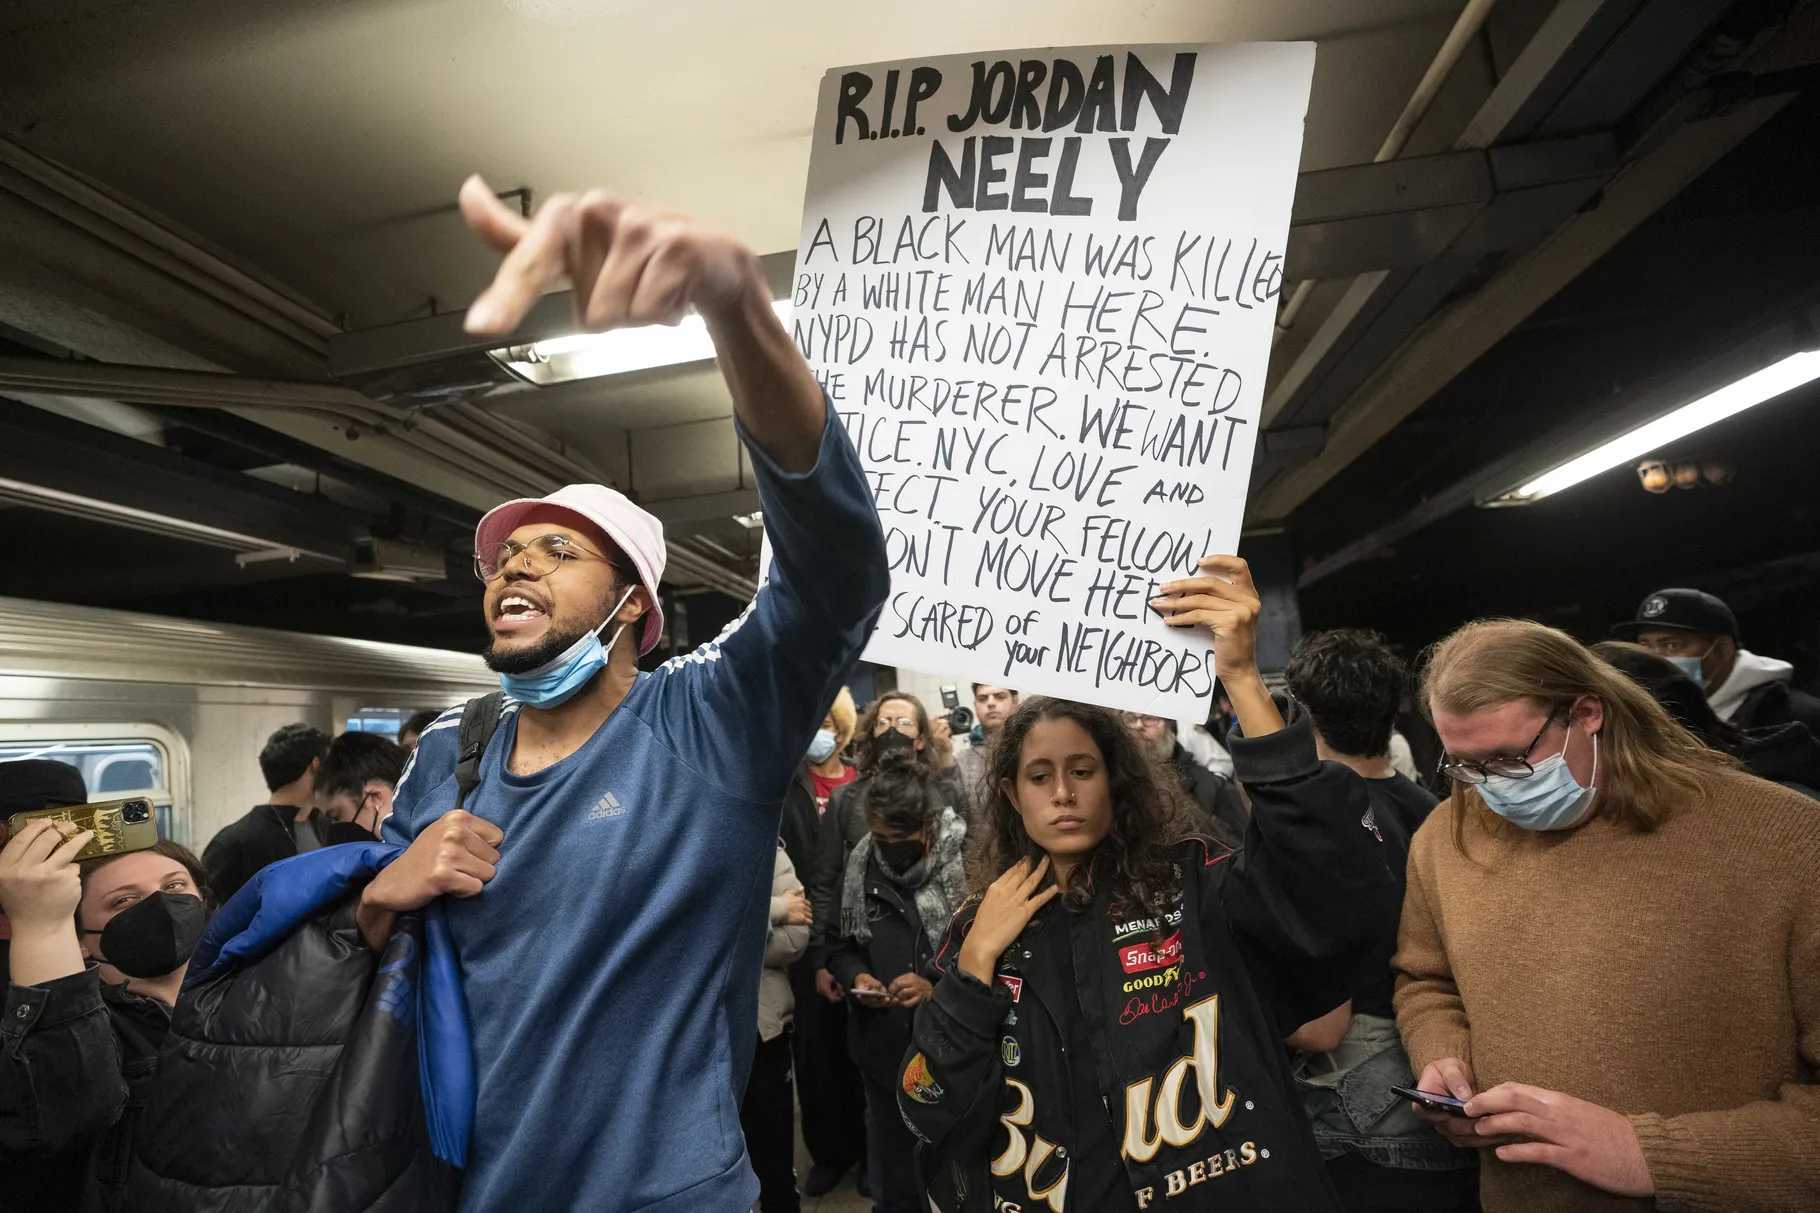 Community Outrage Grows After Chokehold Death Of Jordan Neely  On NYC Subway